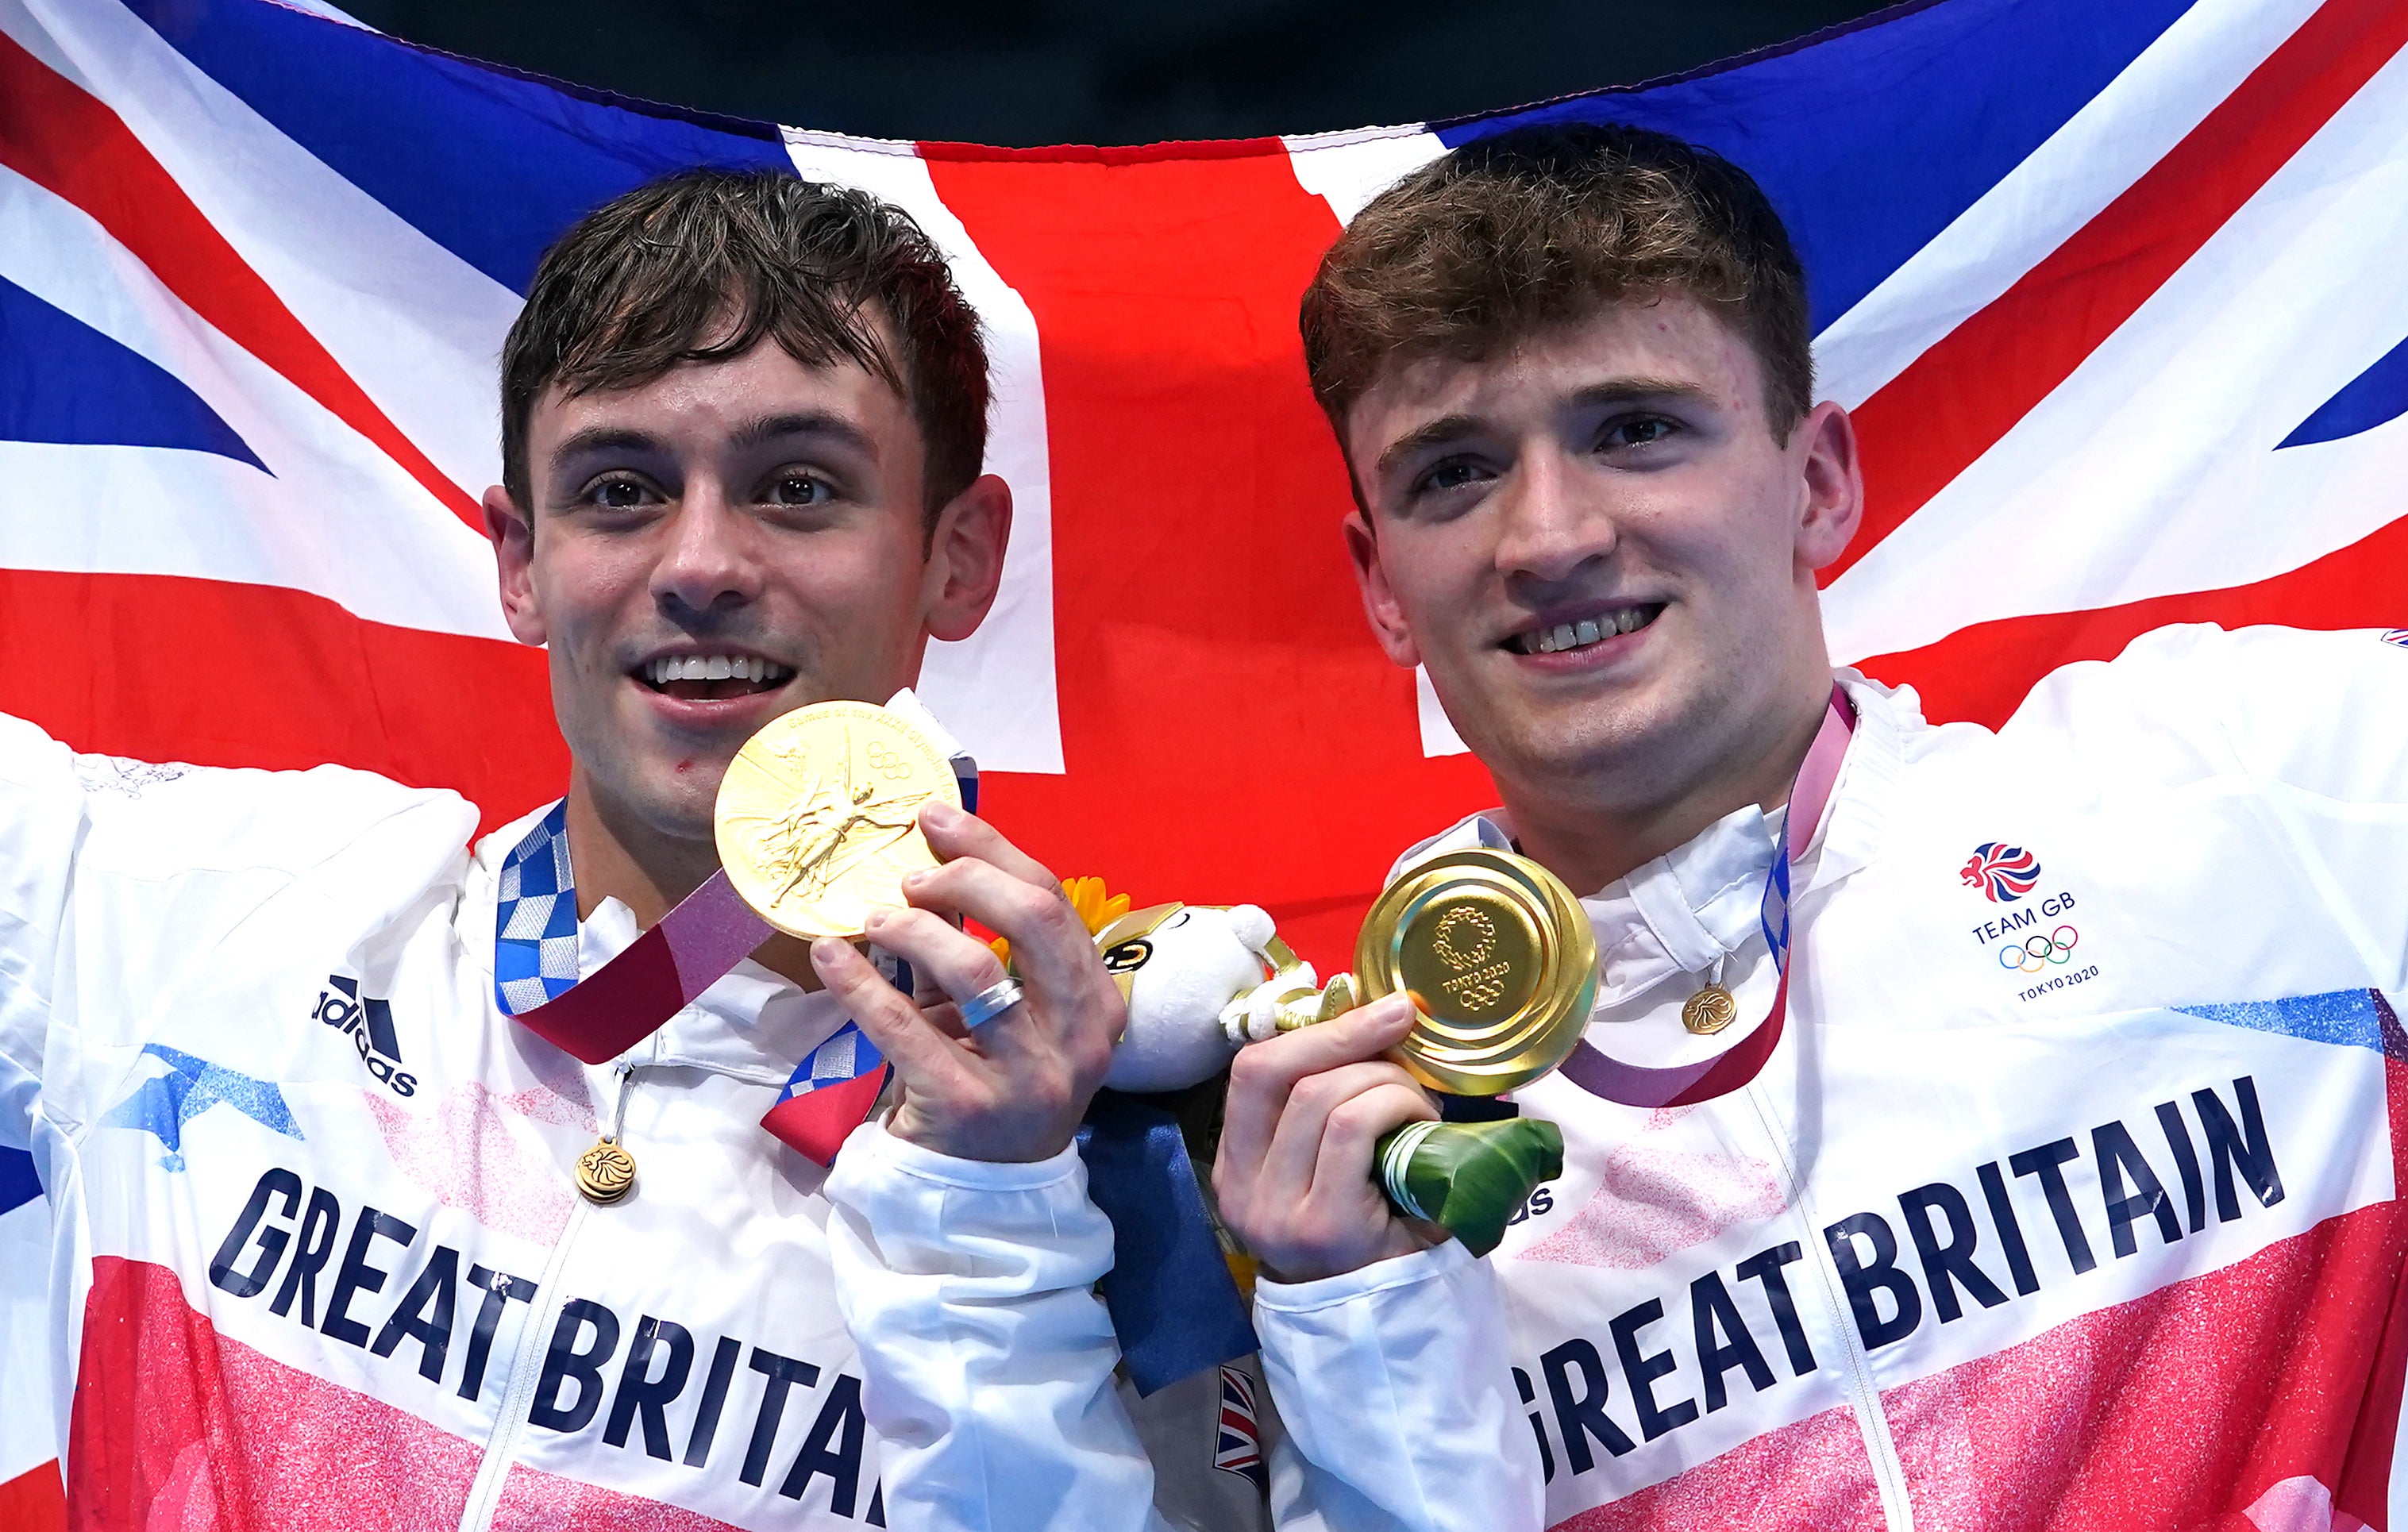 Tom Daley and Matty Lee took glory in Tokyo